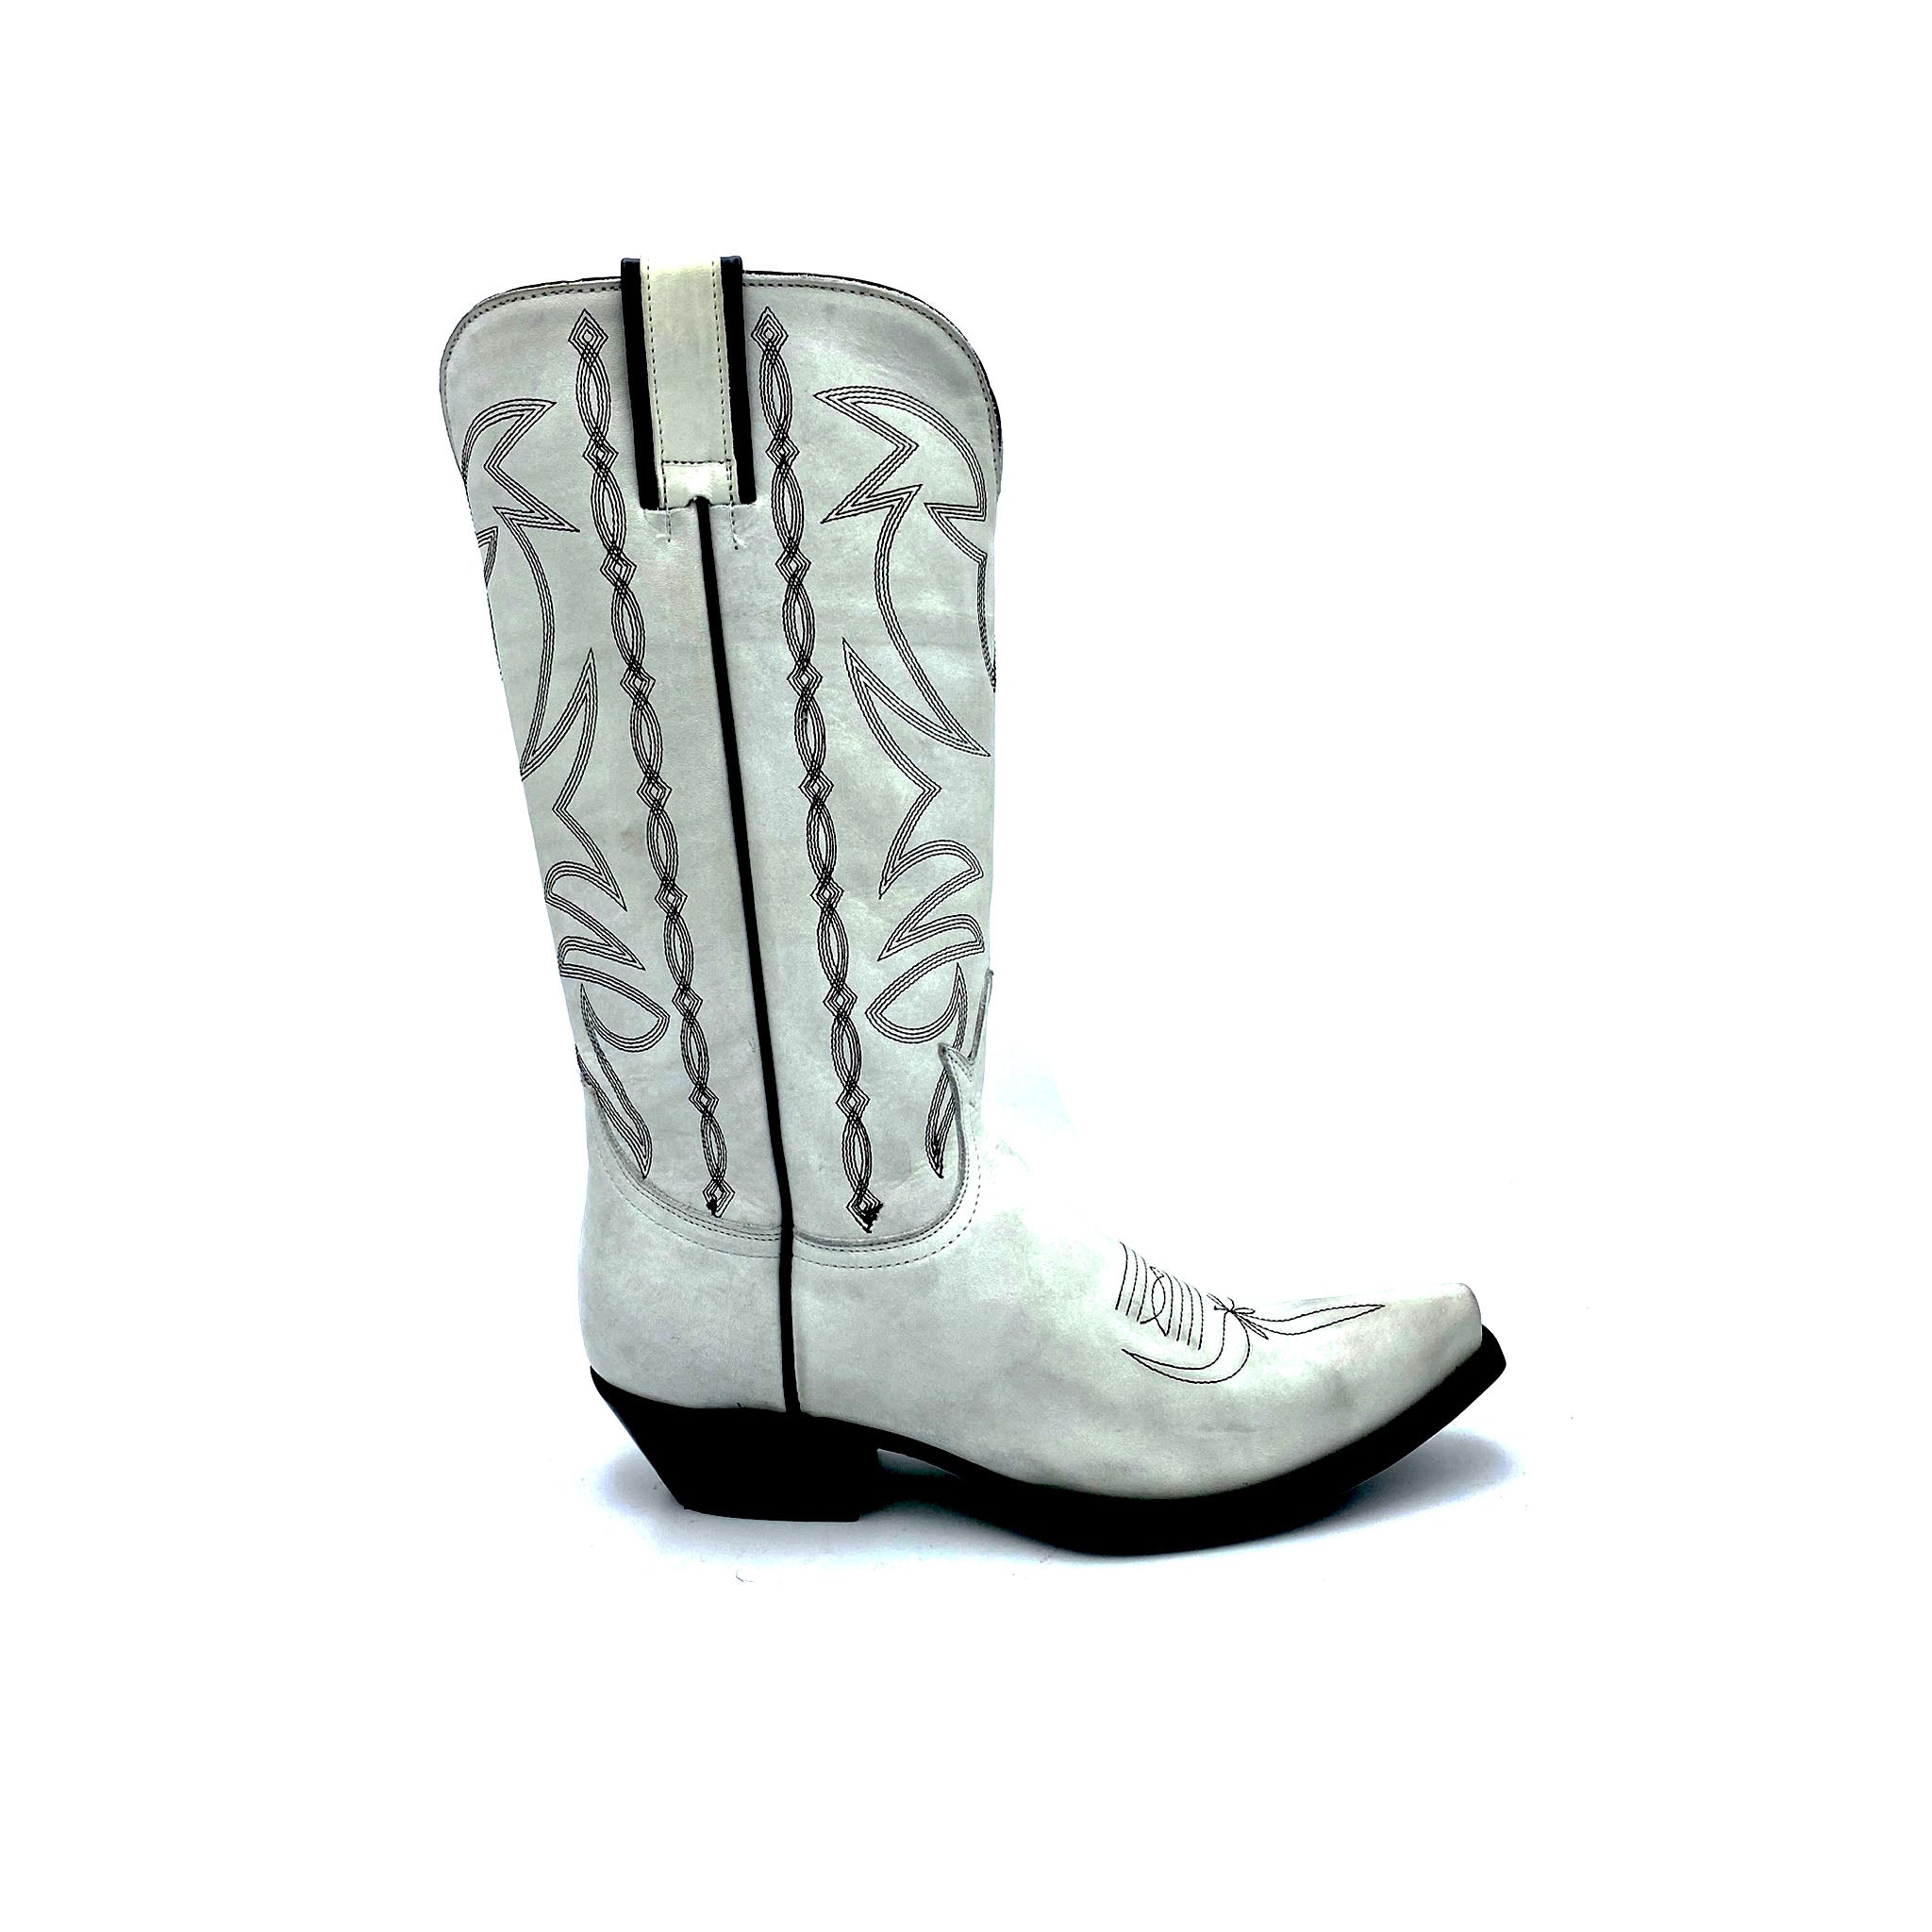 black and white cowboy boots womens